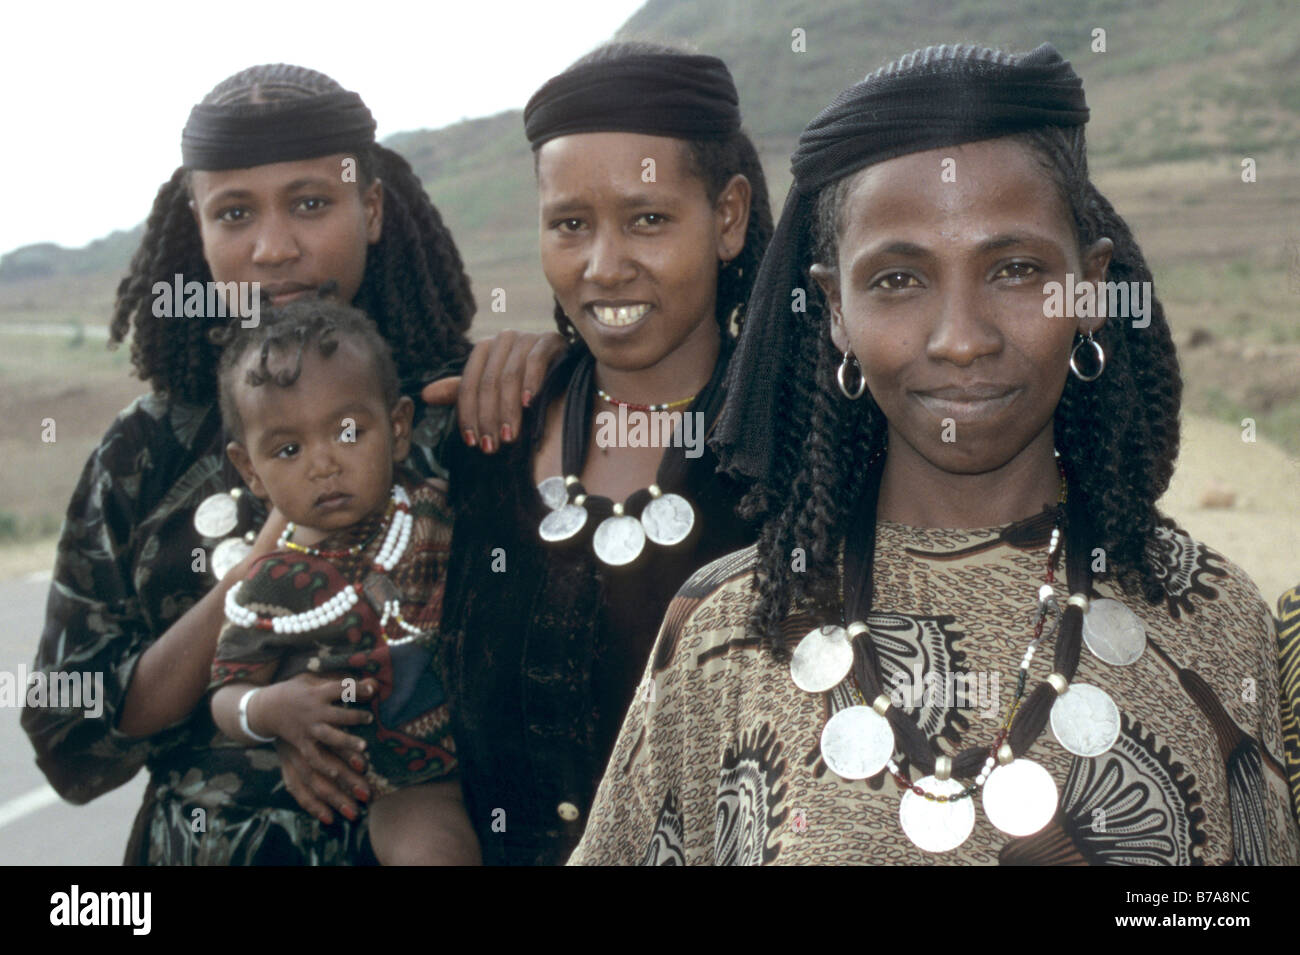 group-of-three-oromo-women-one-of-them-holding-a-toddler-each-wearing-B7A8NC.jpg